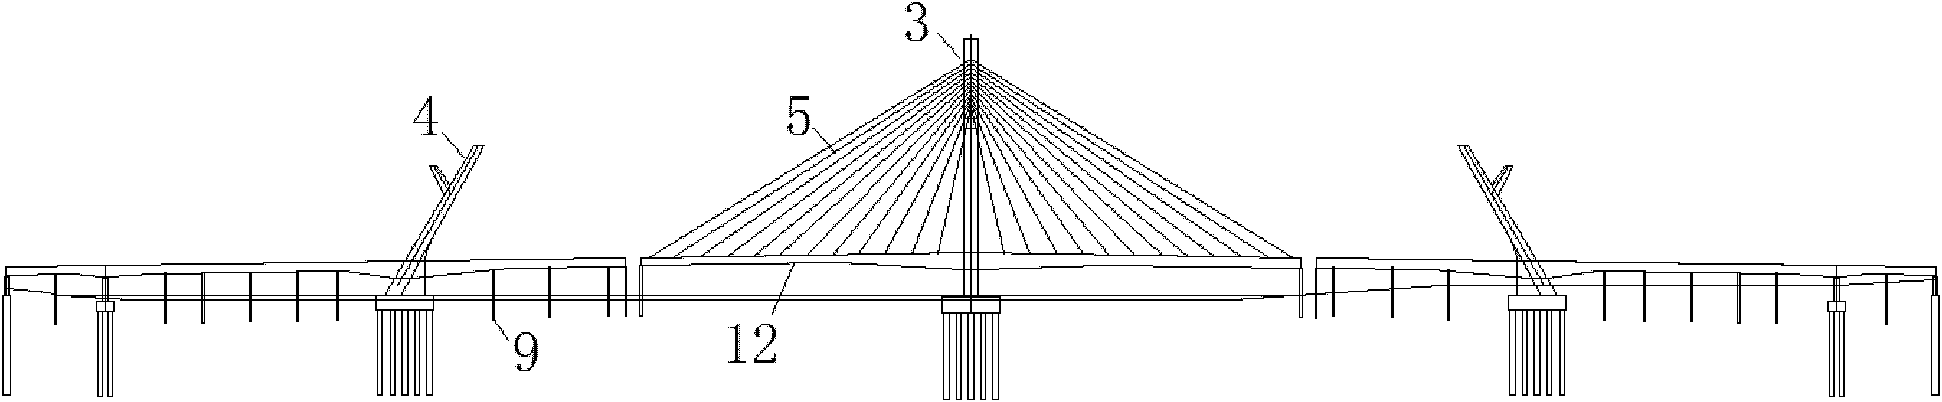 Electing method for side span overhang-middle span cable-stayed three-tower self-anchored type combination suspension bridge